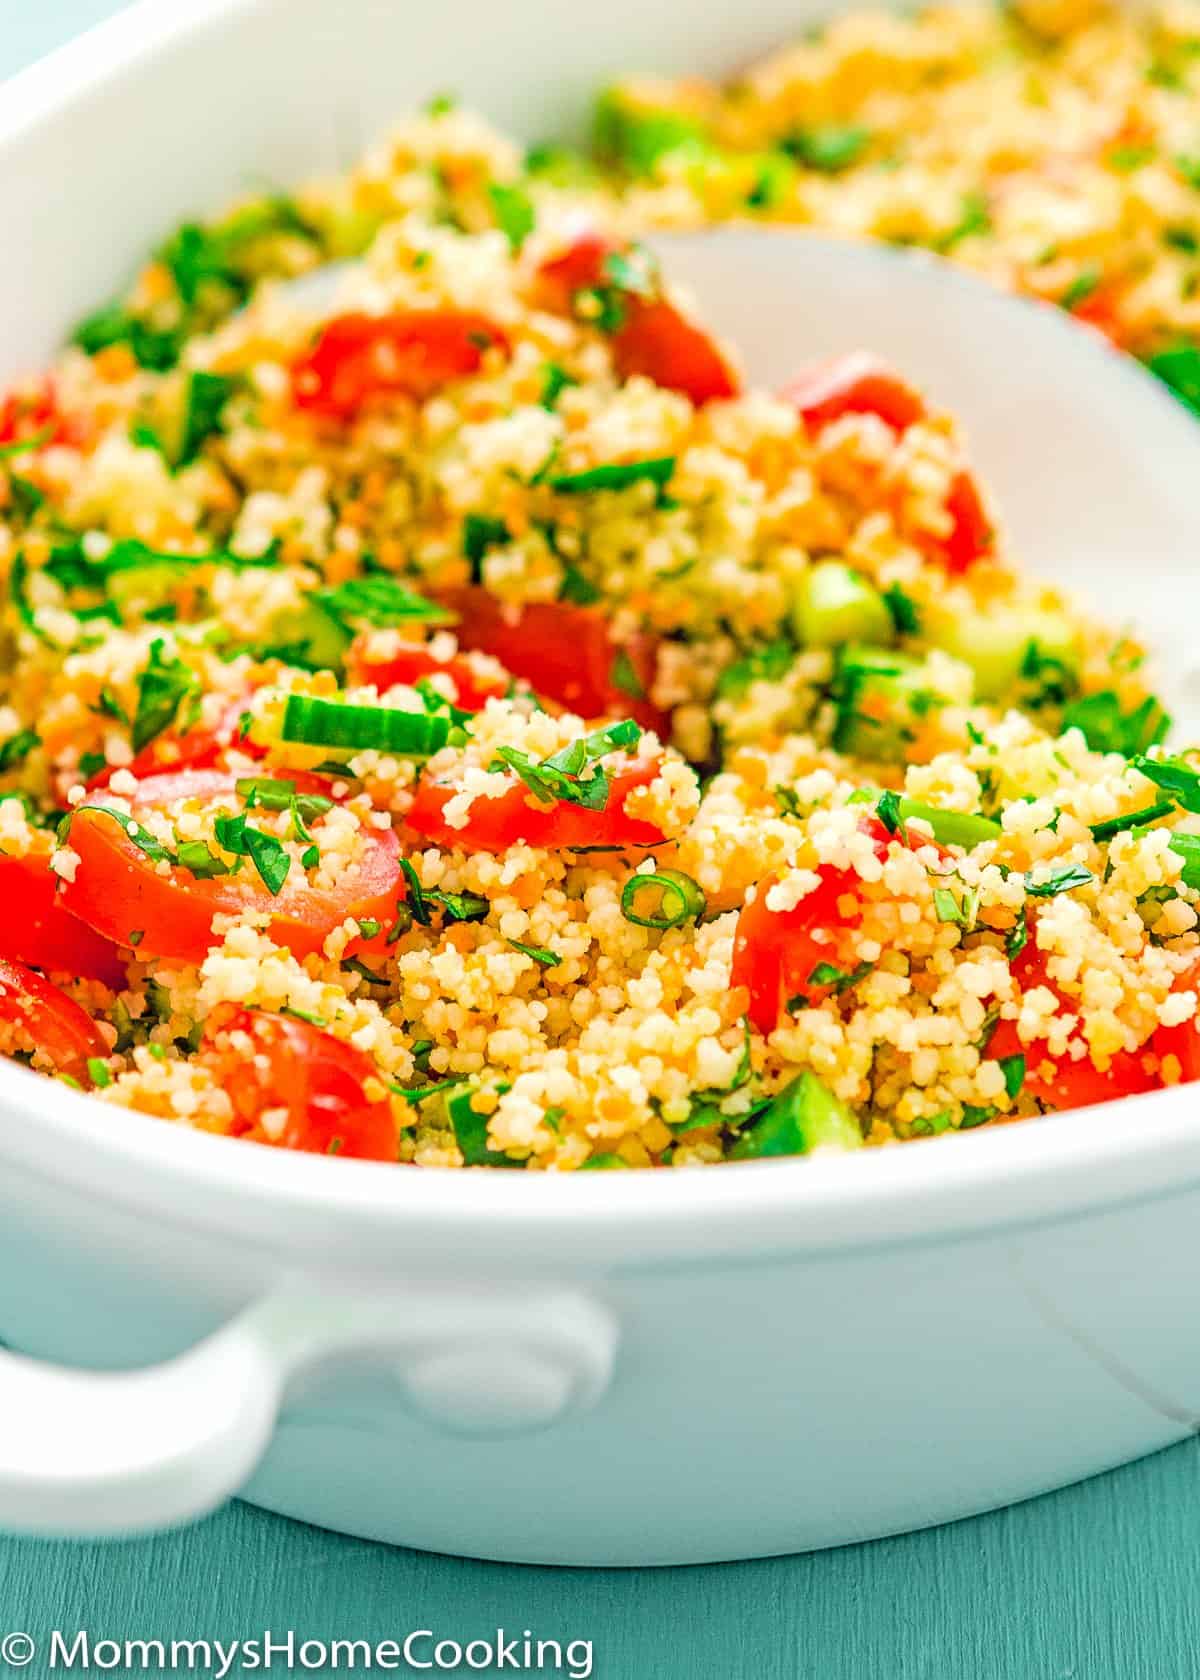 couscous, cucumbers, tomatoes, mint, and parsley salad in a bowl with a serving spoon.